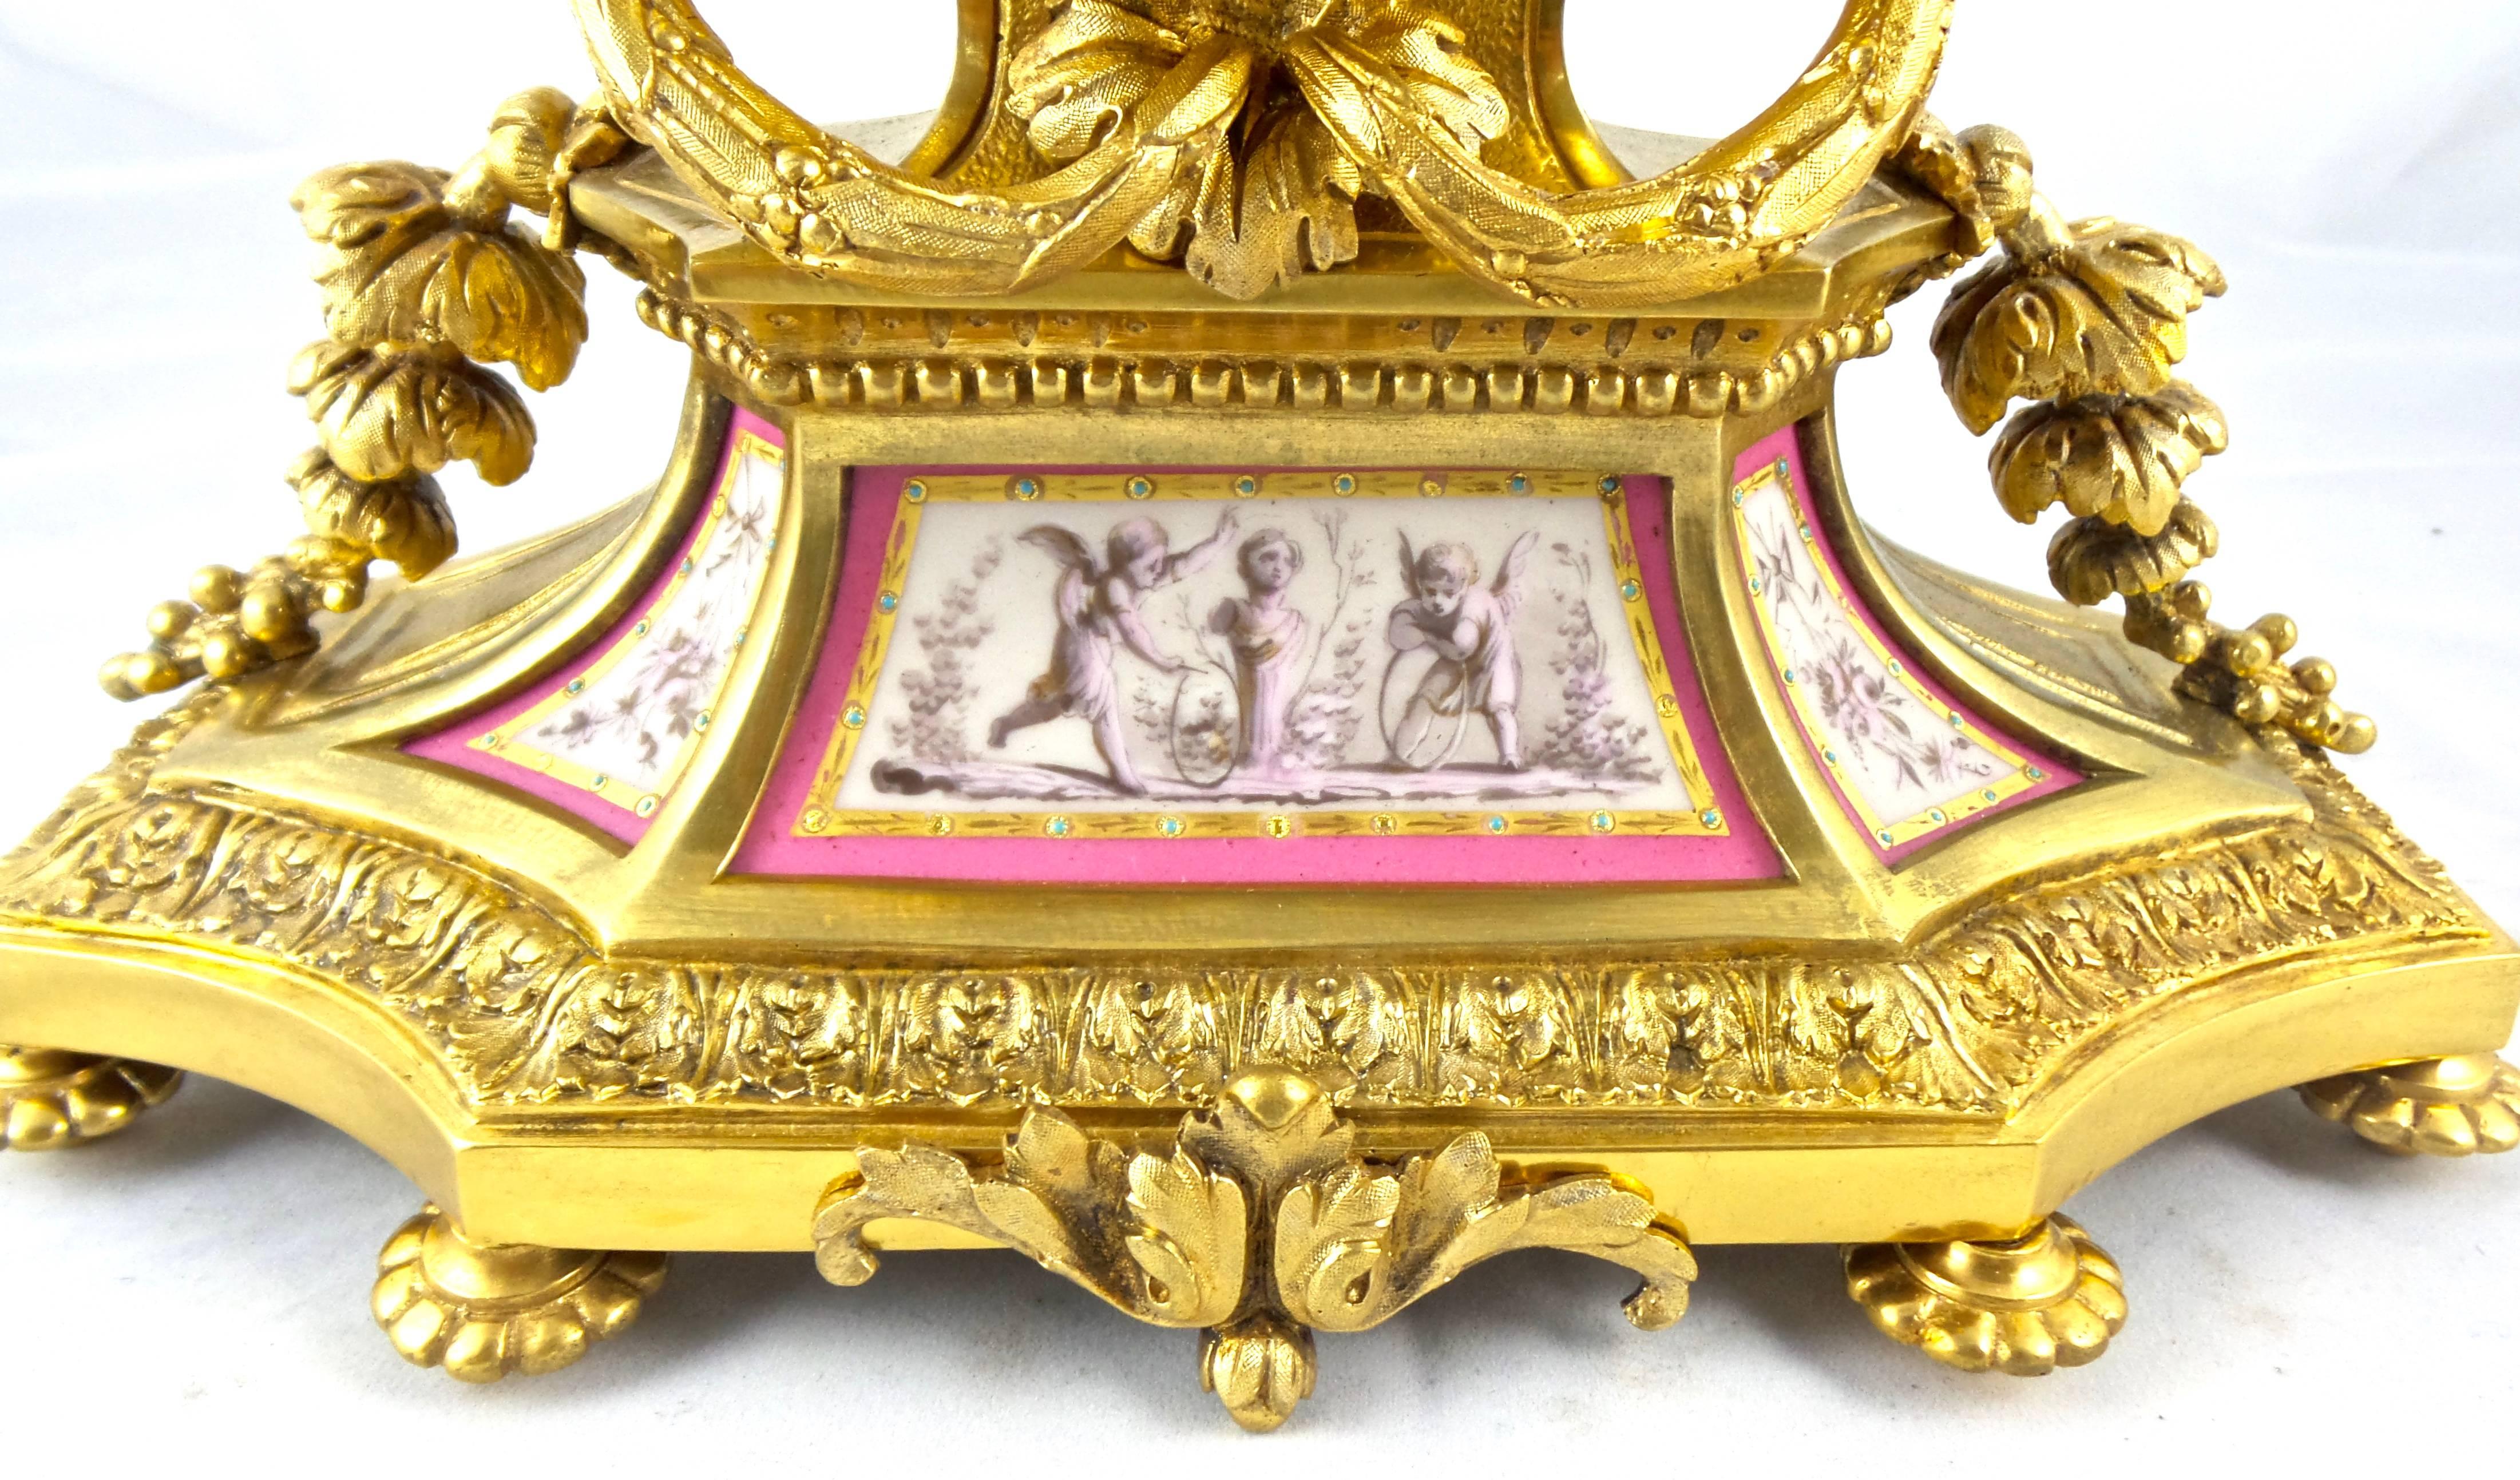 An original authentic antique 19th century French gilt ormolu bronze and Sèvres porcelain Mantel clock of superb quality by Japy Freres and retailed by Leroy Fils of Paris
A stunning Palace Quality clock with the most beautiful Fine details having